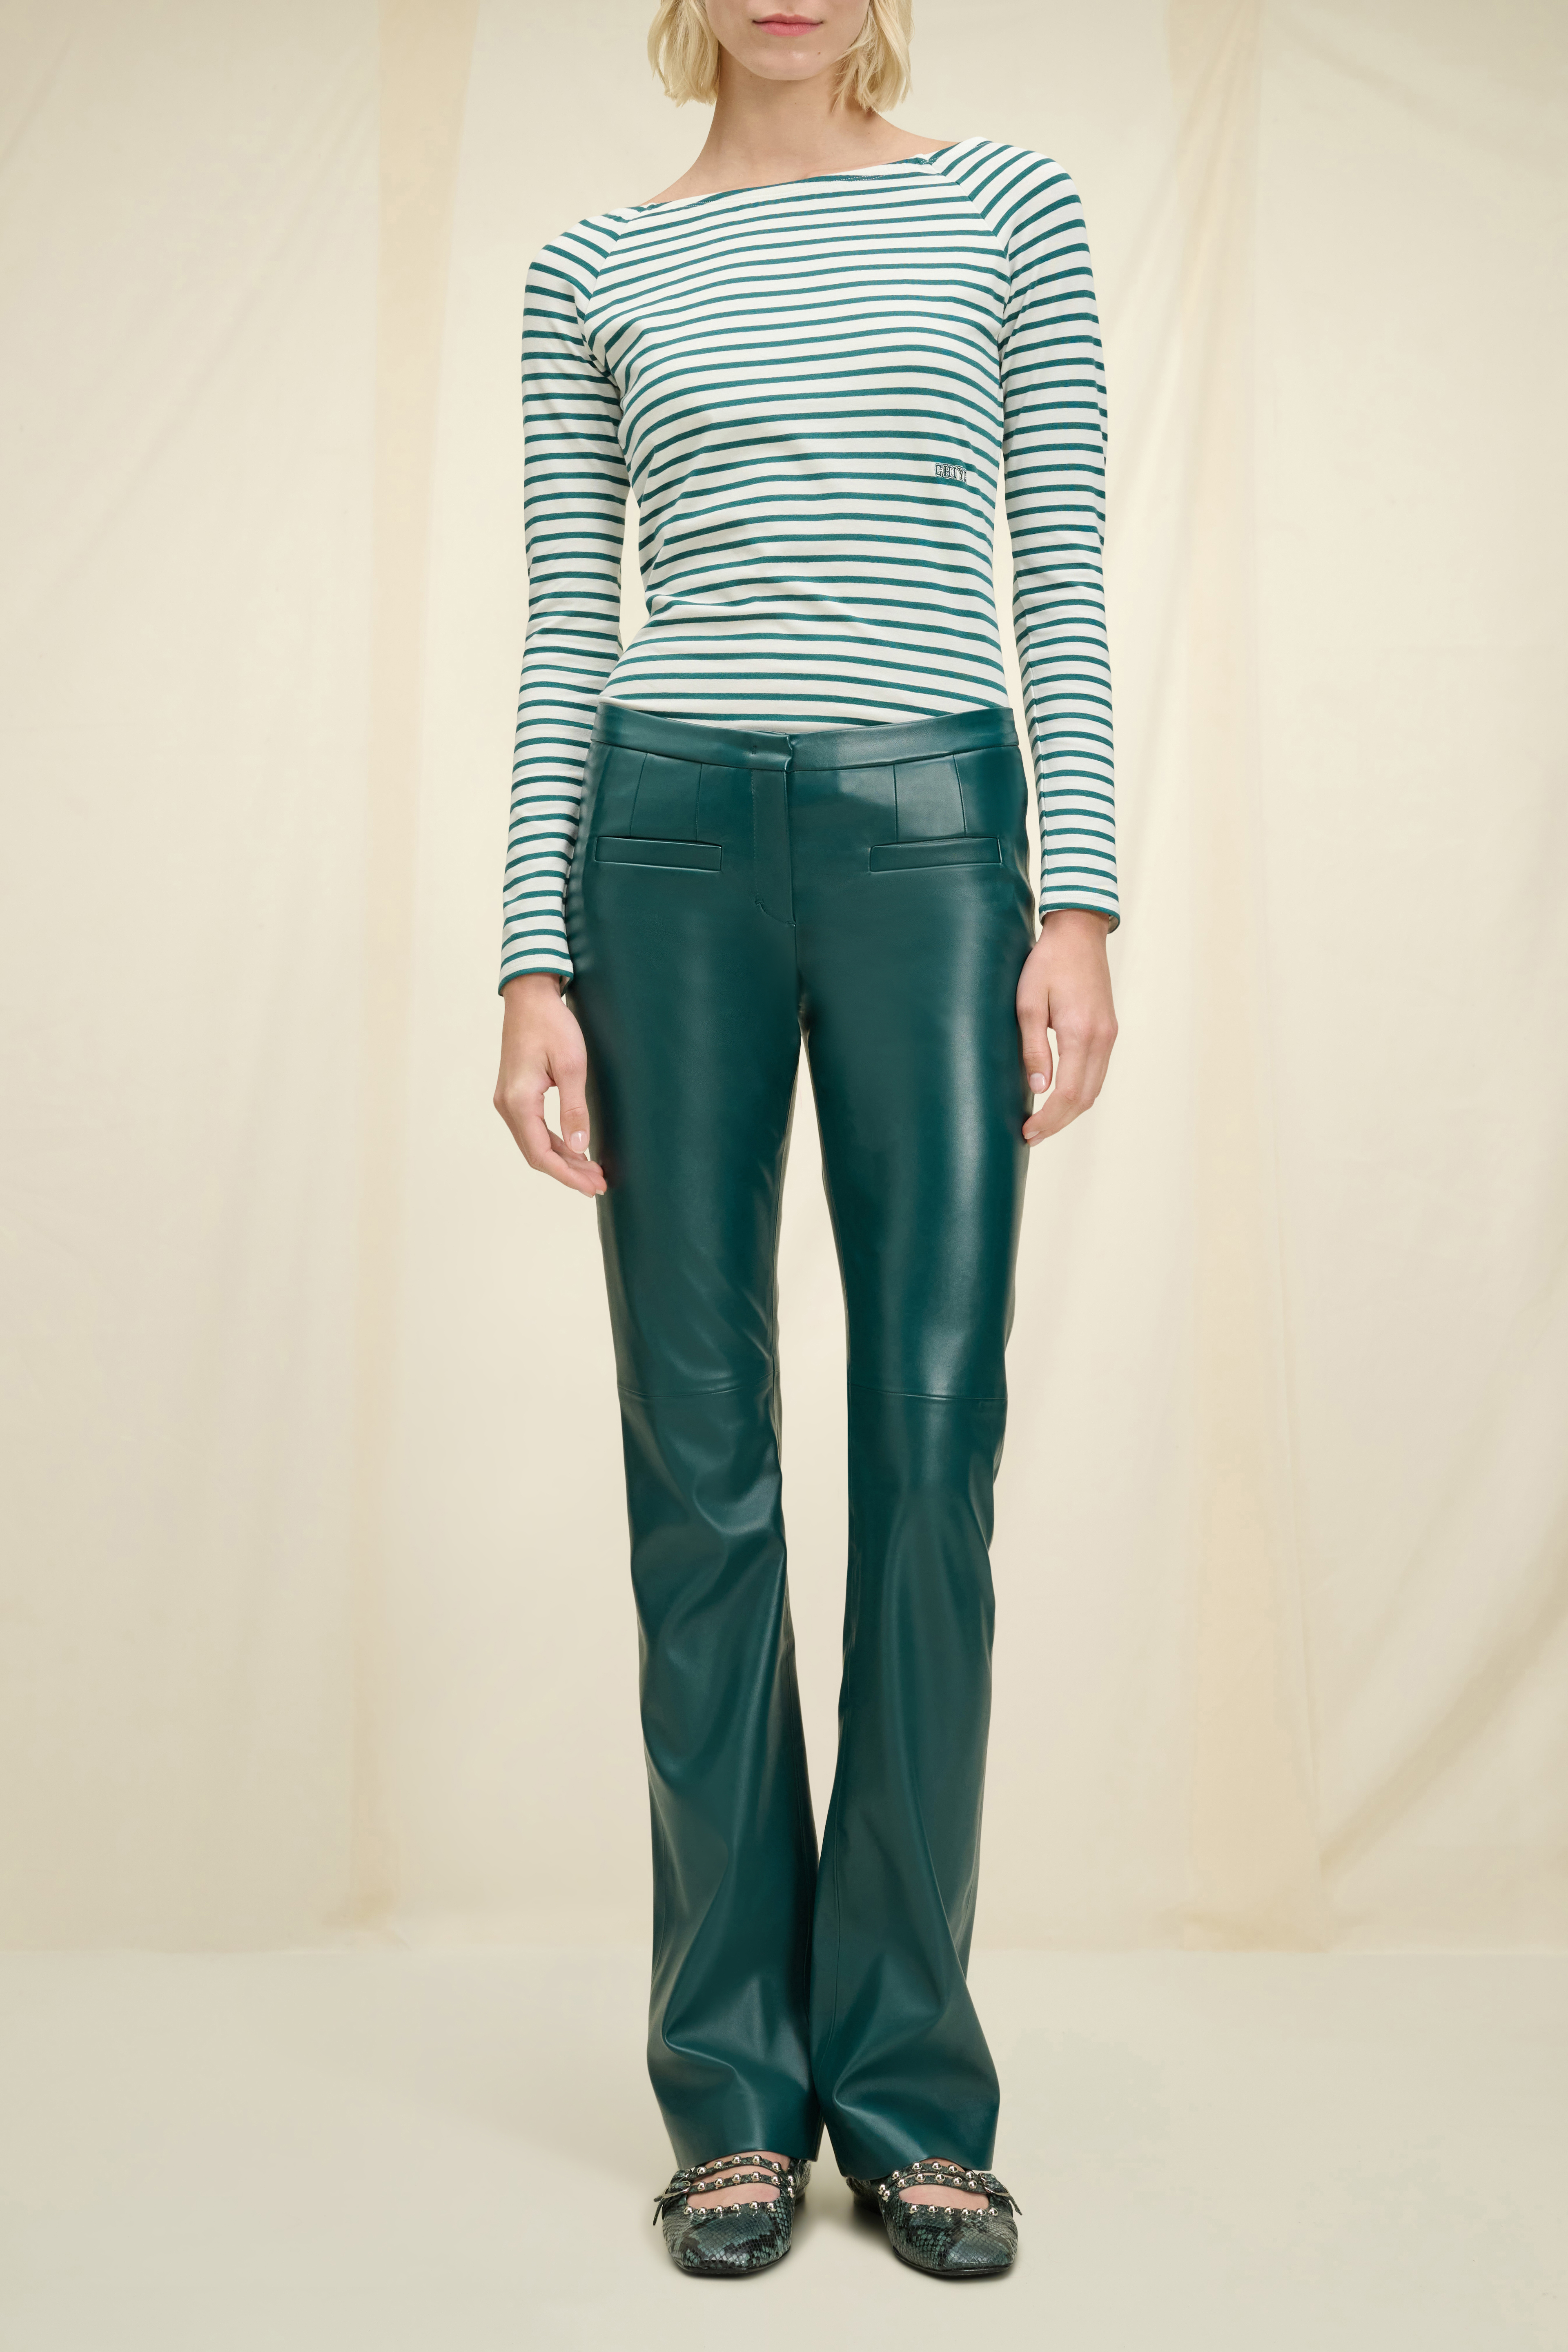 Dorothee Schumacher Embroidered striped top with a bateau